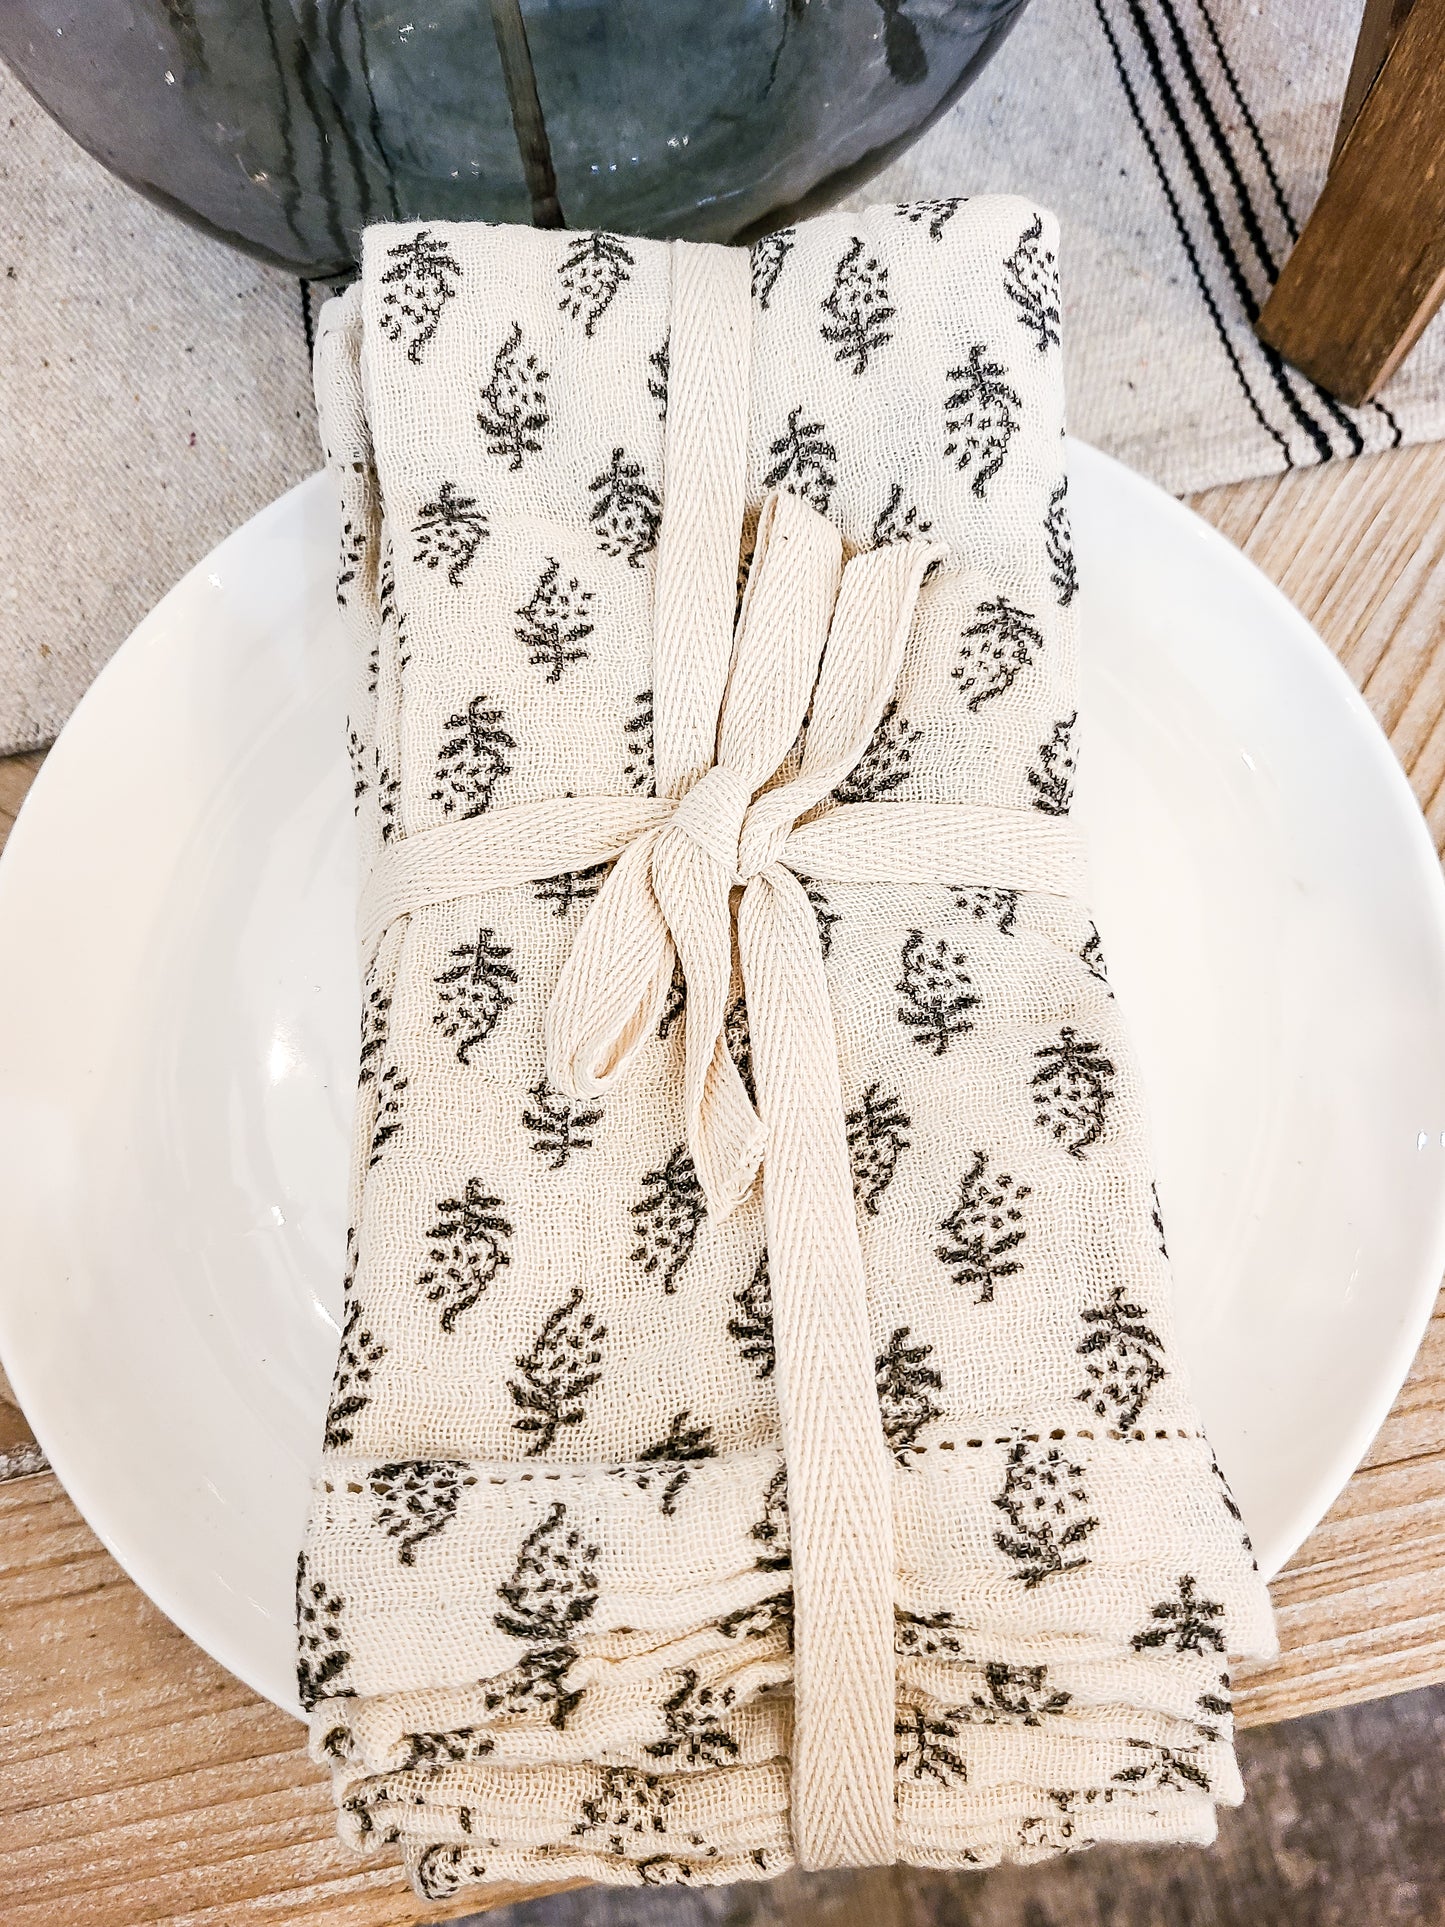 Napkins with Printed Floral Pattern